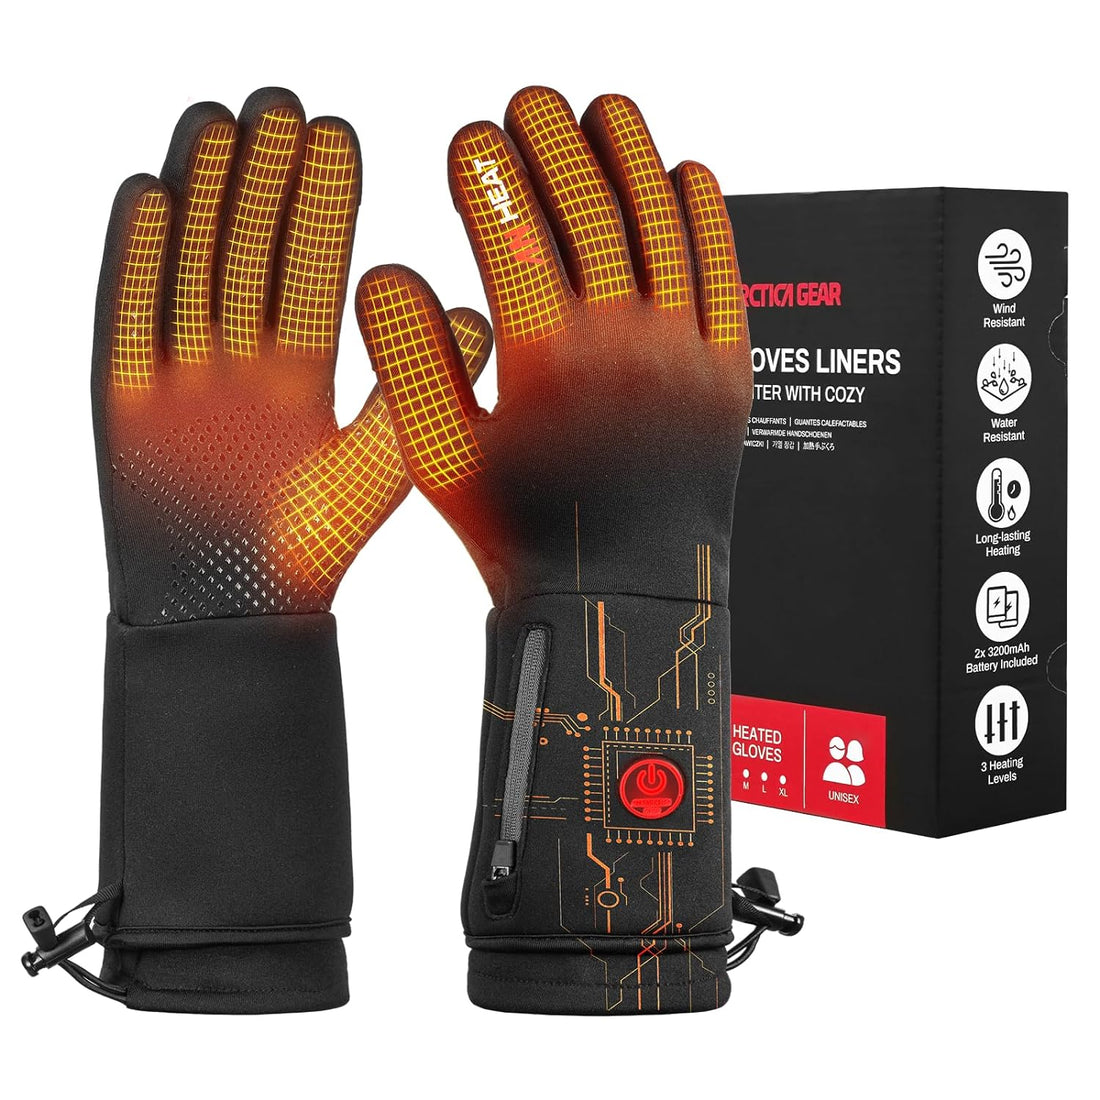 Heated Gloves, ANTARCTICA GEAR Winter Liners Heating Gloves for Men and Women, 3200mAh Rechargeable Battery Included, Hand Warm Gloves for Cold Weather（M）